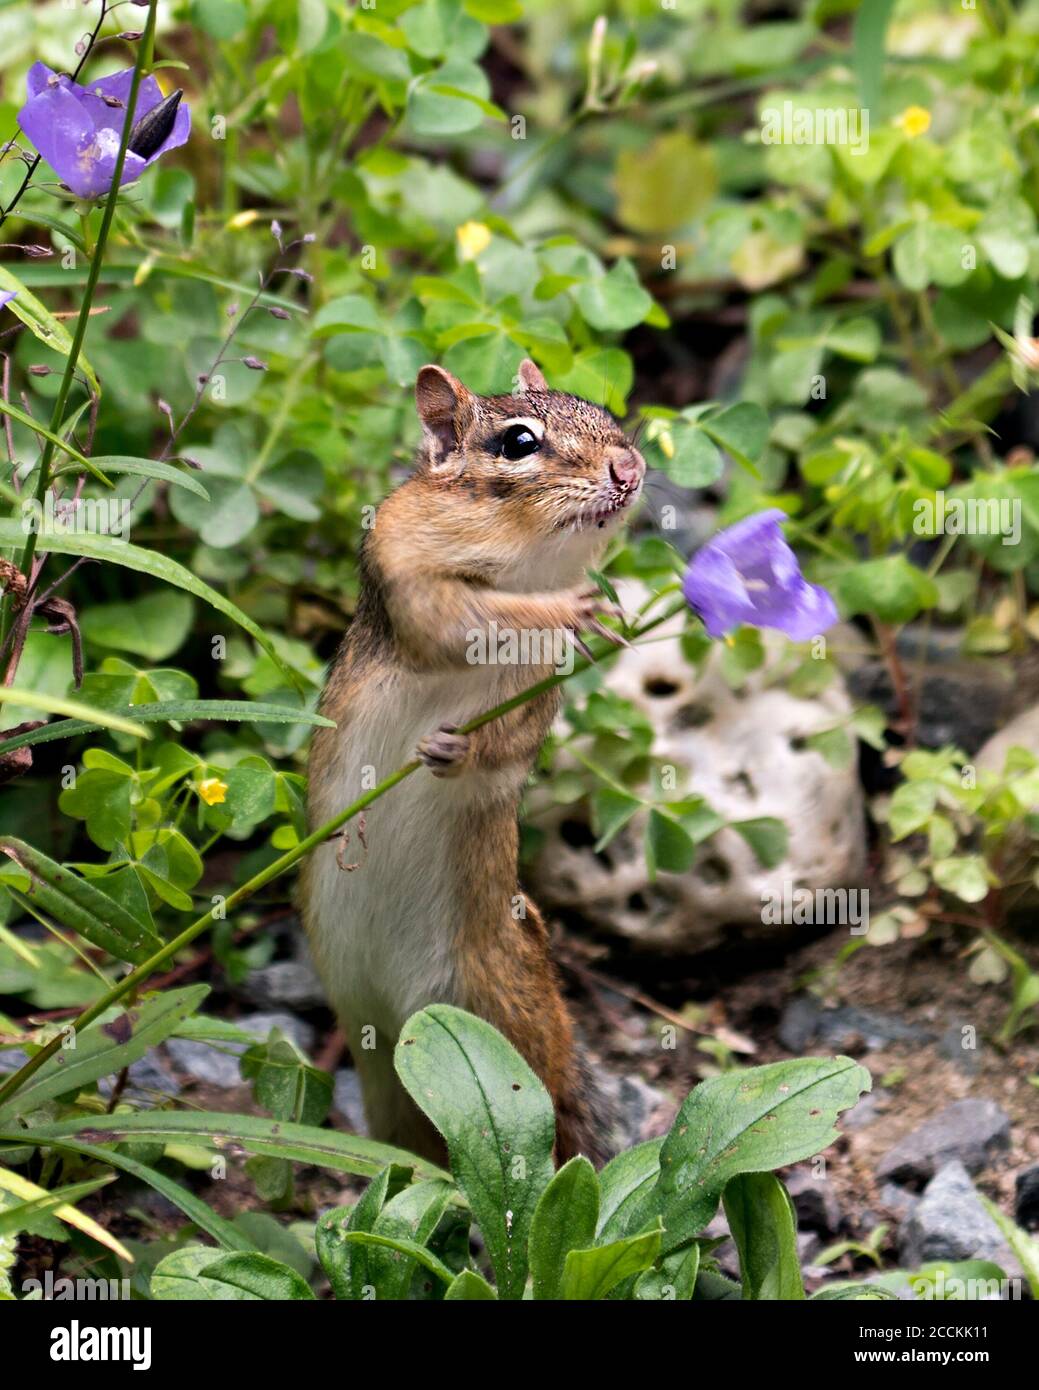 Chipmunk close-up profile view playing and smelling a flower in its environment and habitat with wildflowers and foliage background and foreground. Stock Photo